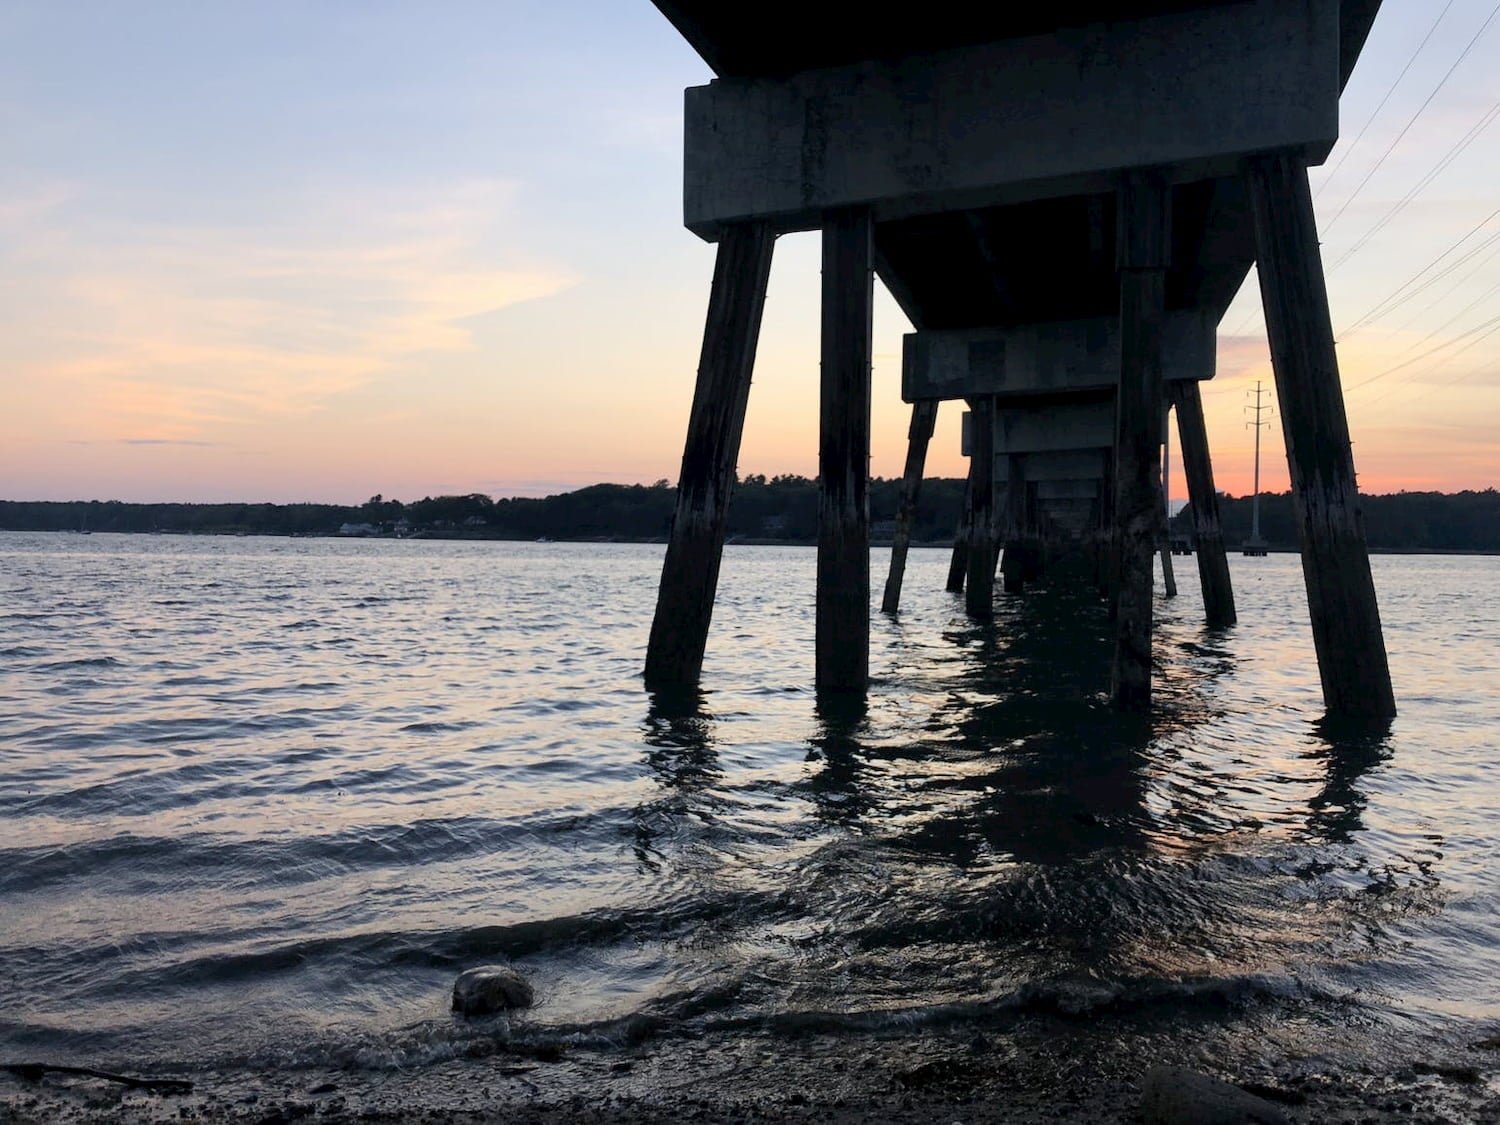 sunset view from under a pier and over the water